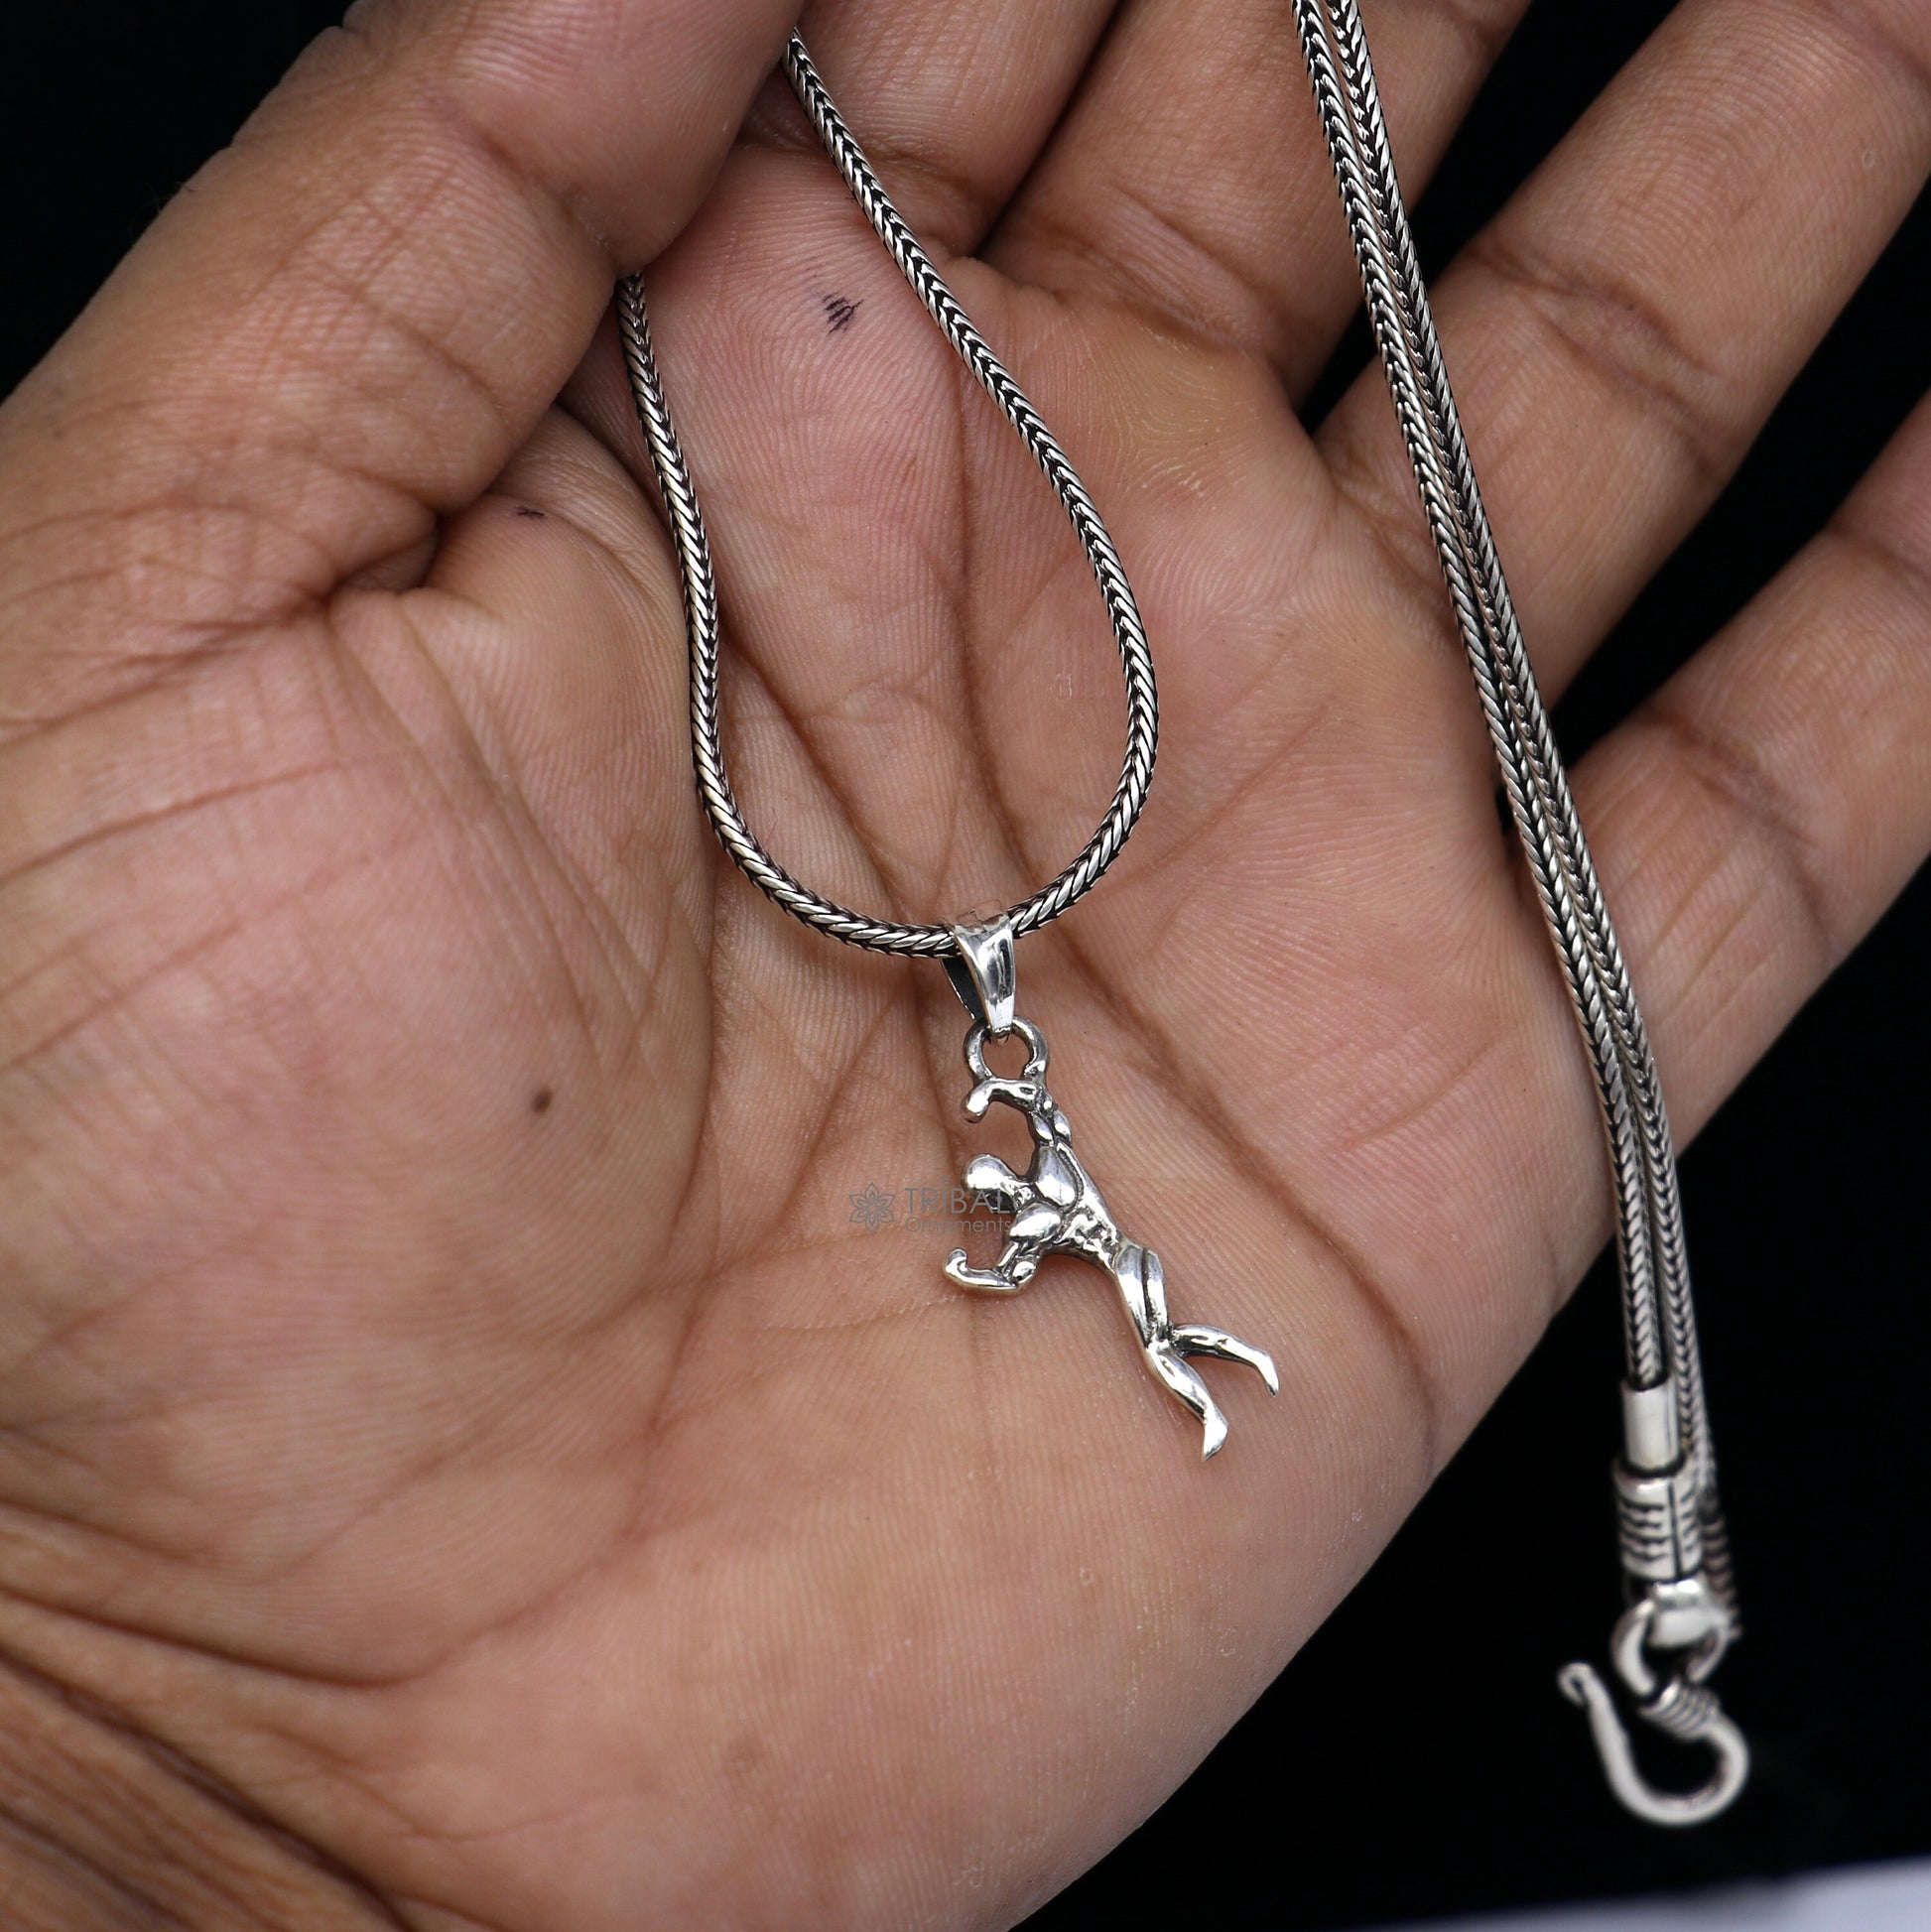 Exclusive design solid 925 sterling silver excellent unique body builder pendant unisex gifting pendant nsp653 - TRIBAL ORNAMENTS